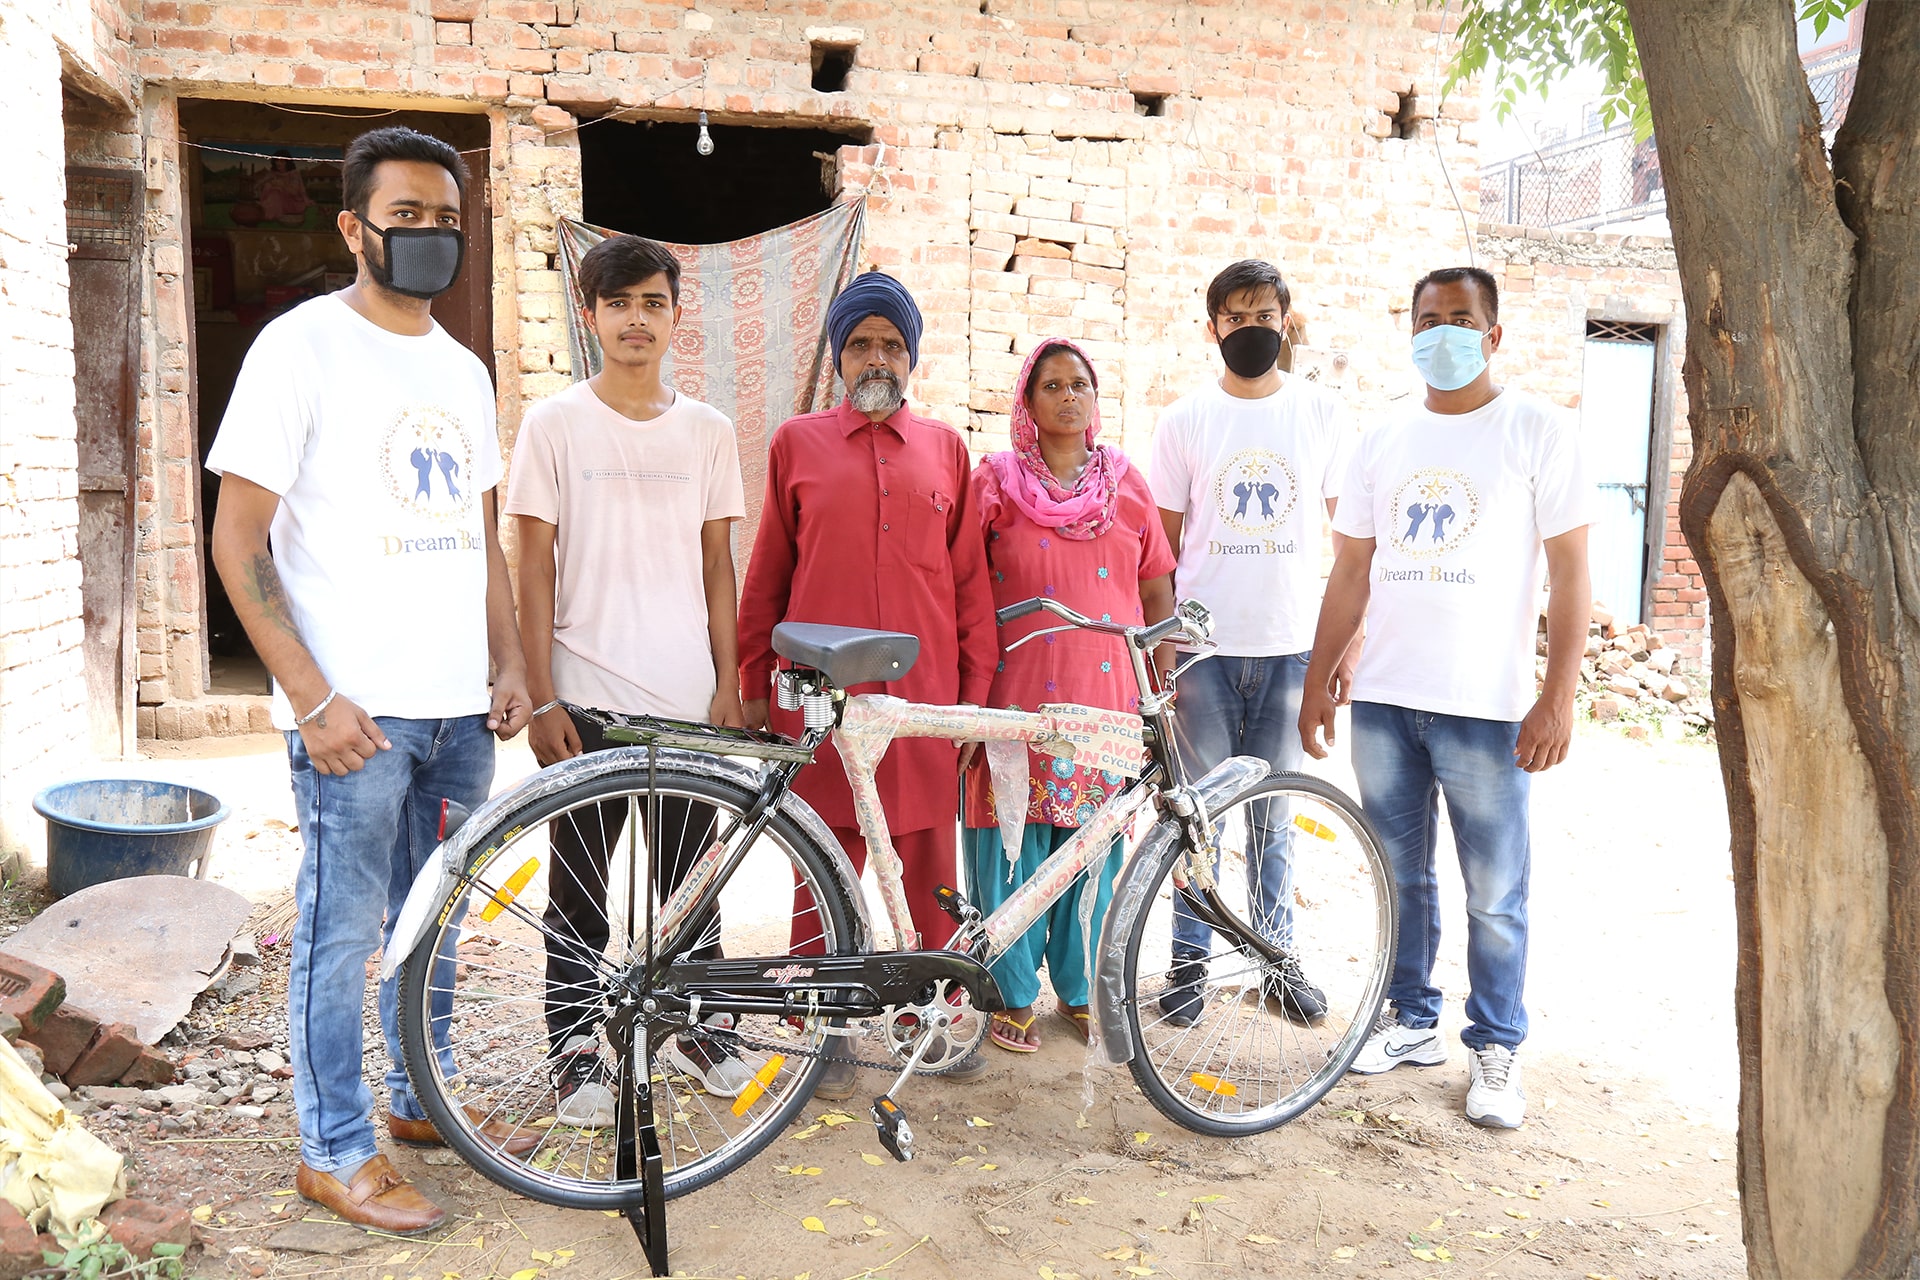 Supporting the Dream of a Comfortable Life: By donating a cycle to each